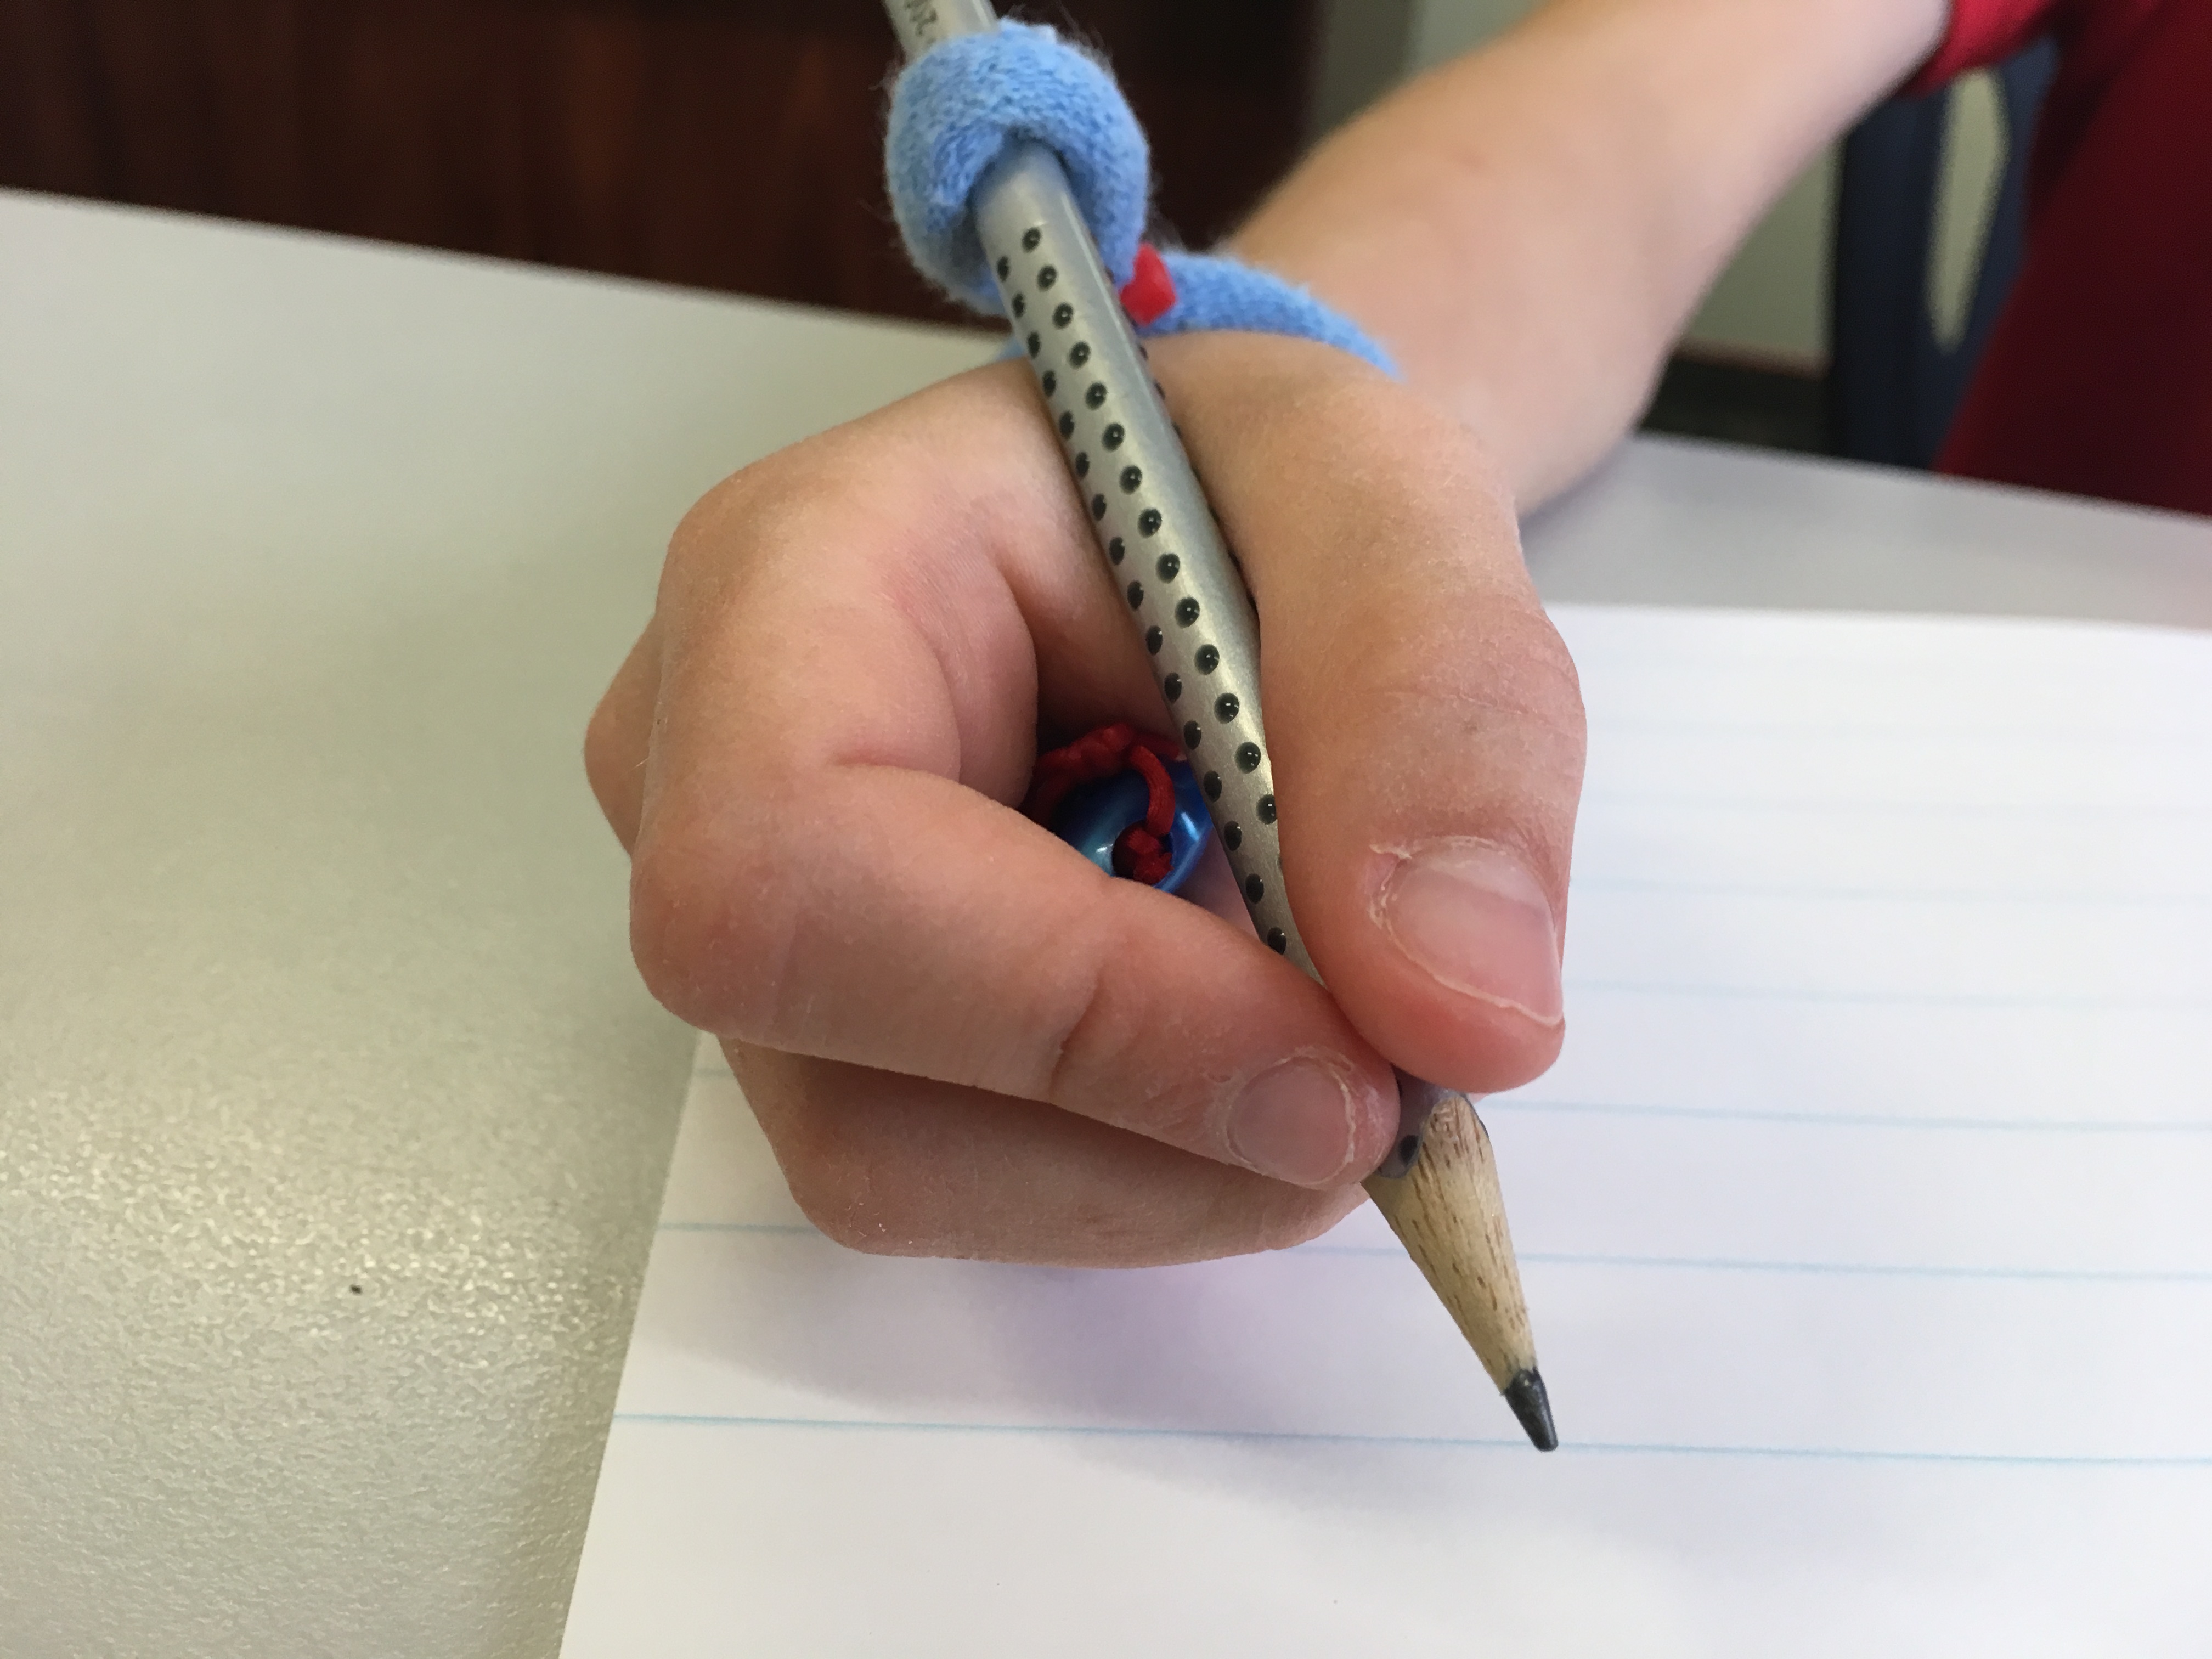 Pencil grip with string attached, showing device in hand, writing